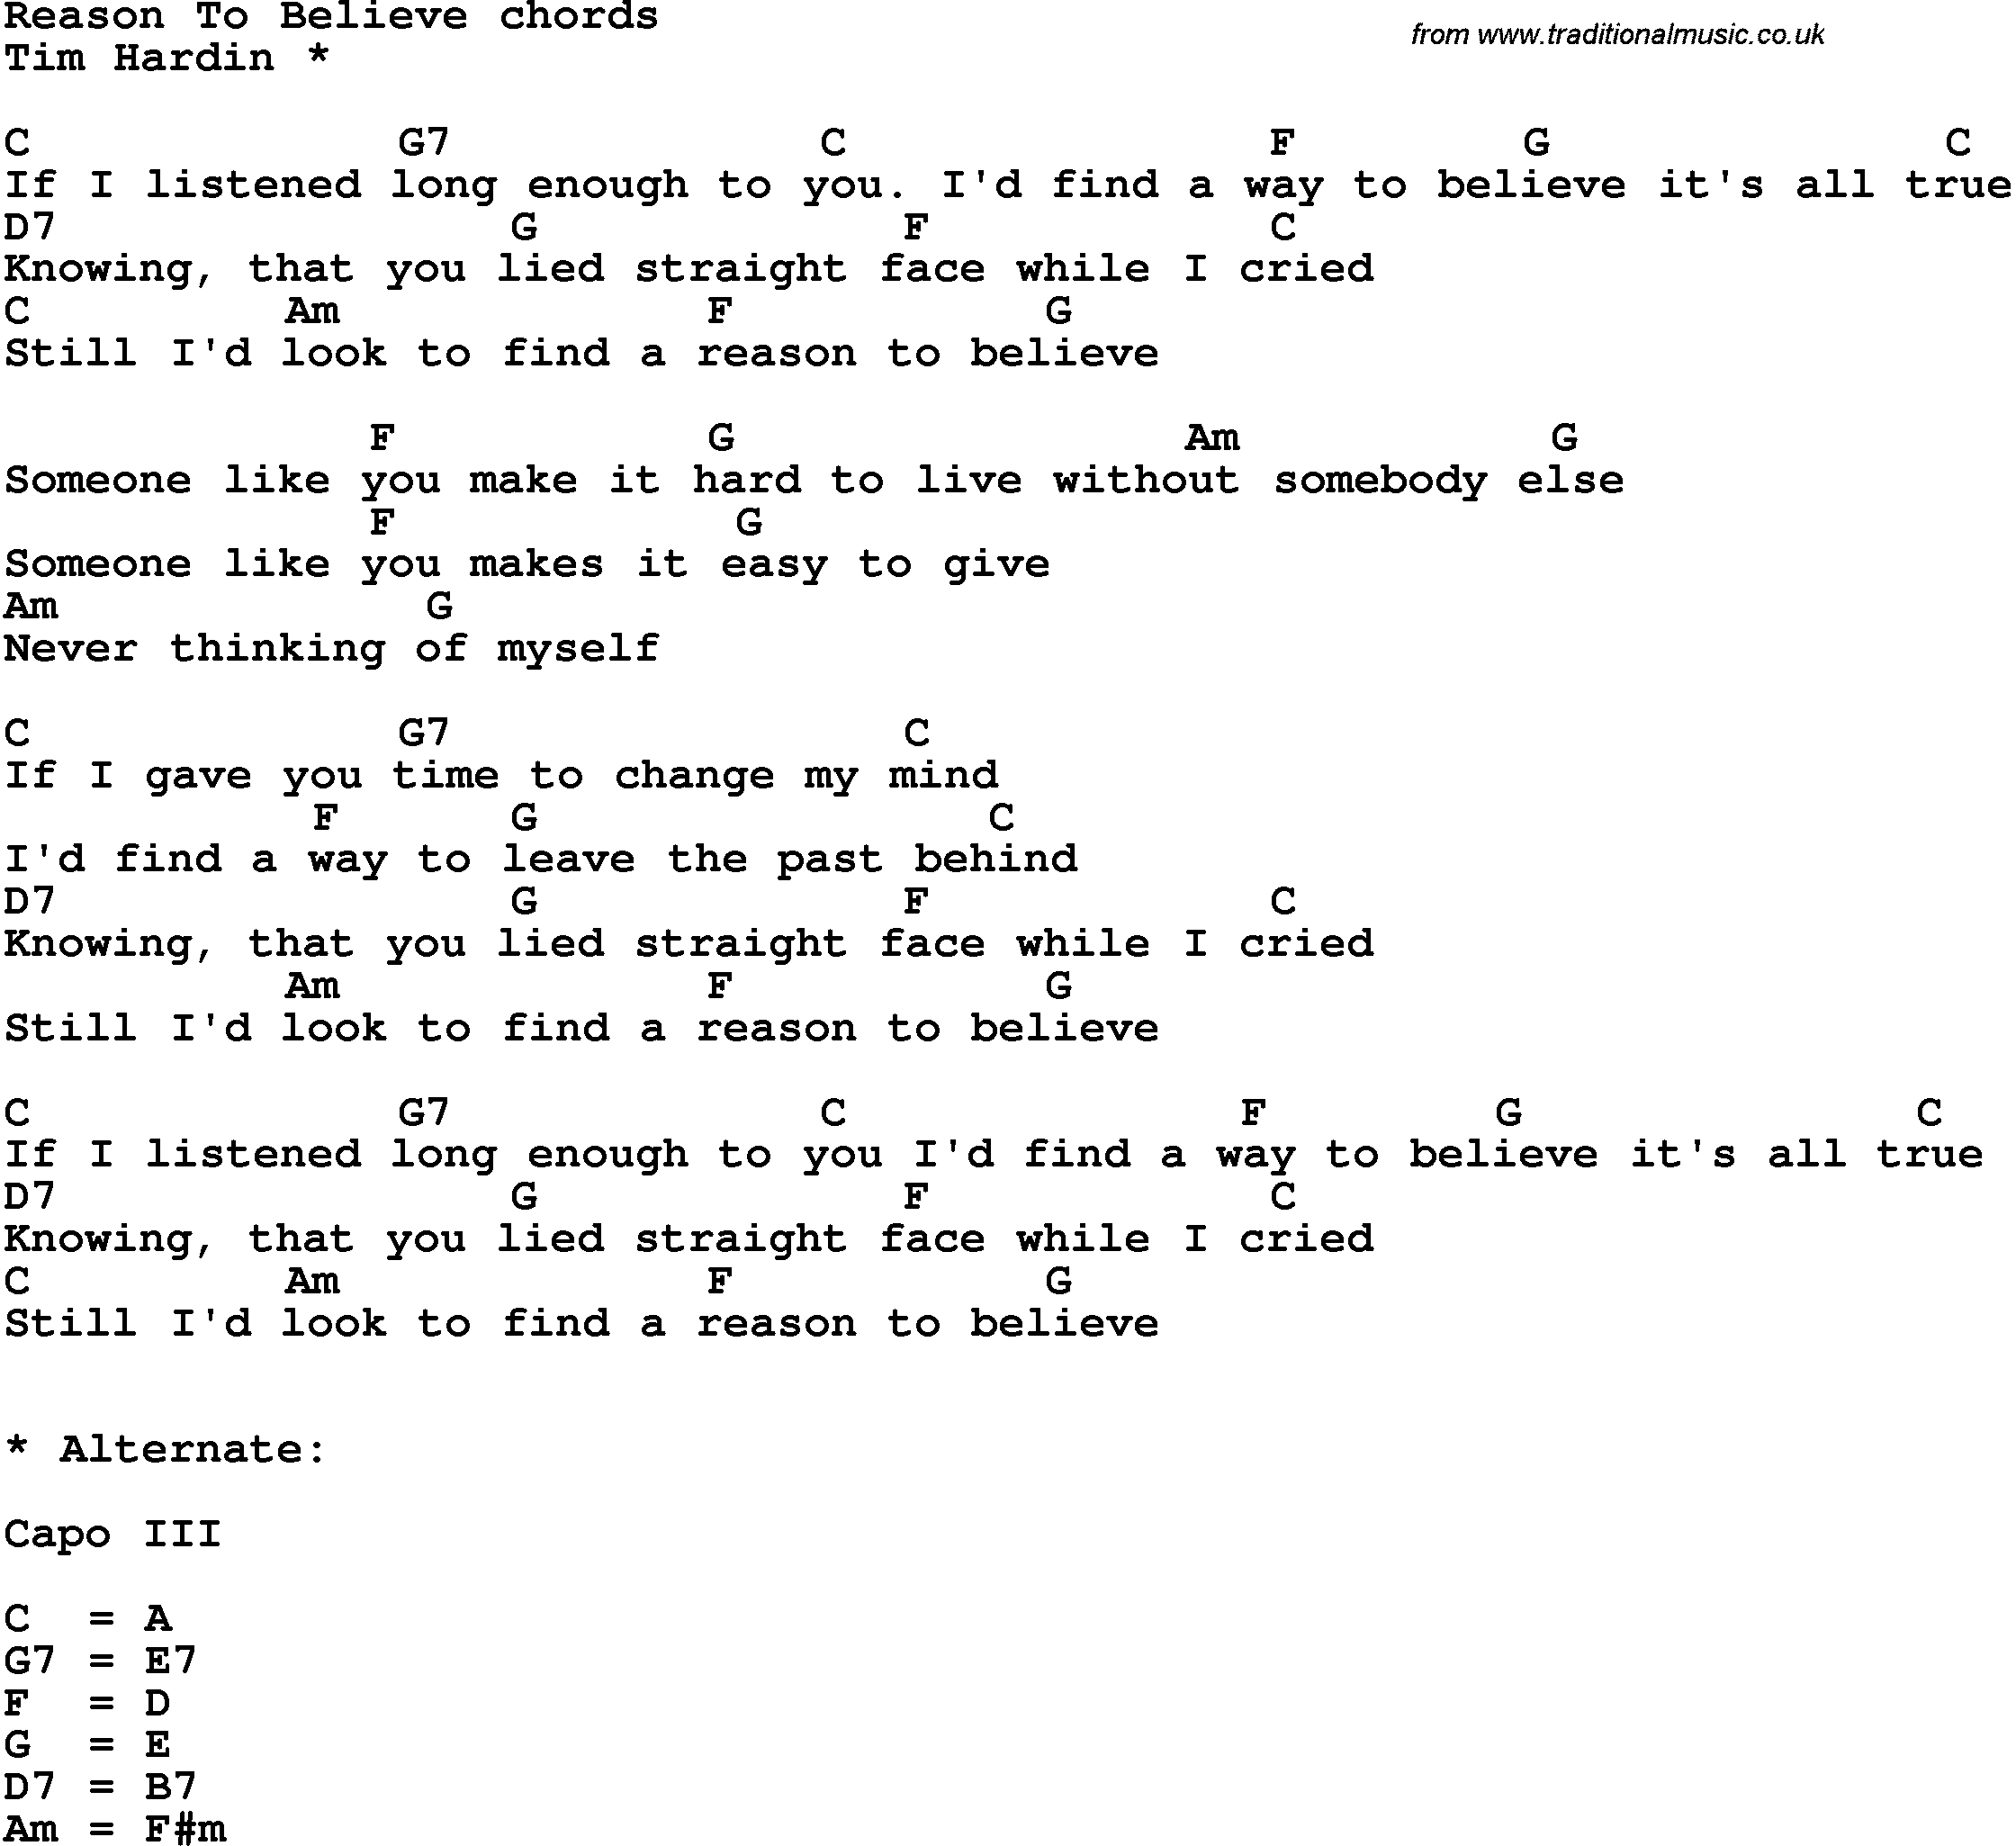 Song Lyrics with guitar chords for Reason To Believe